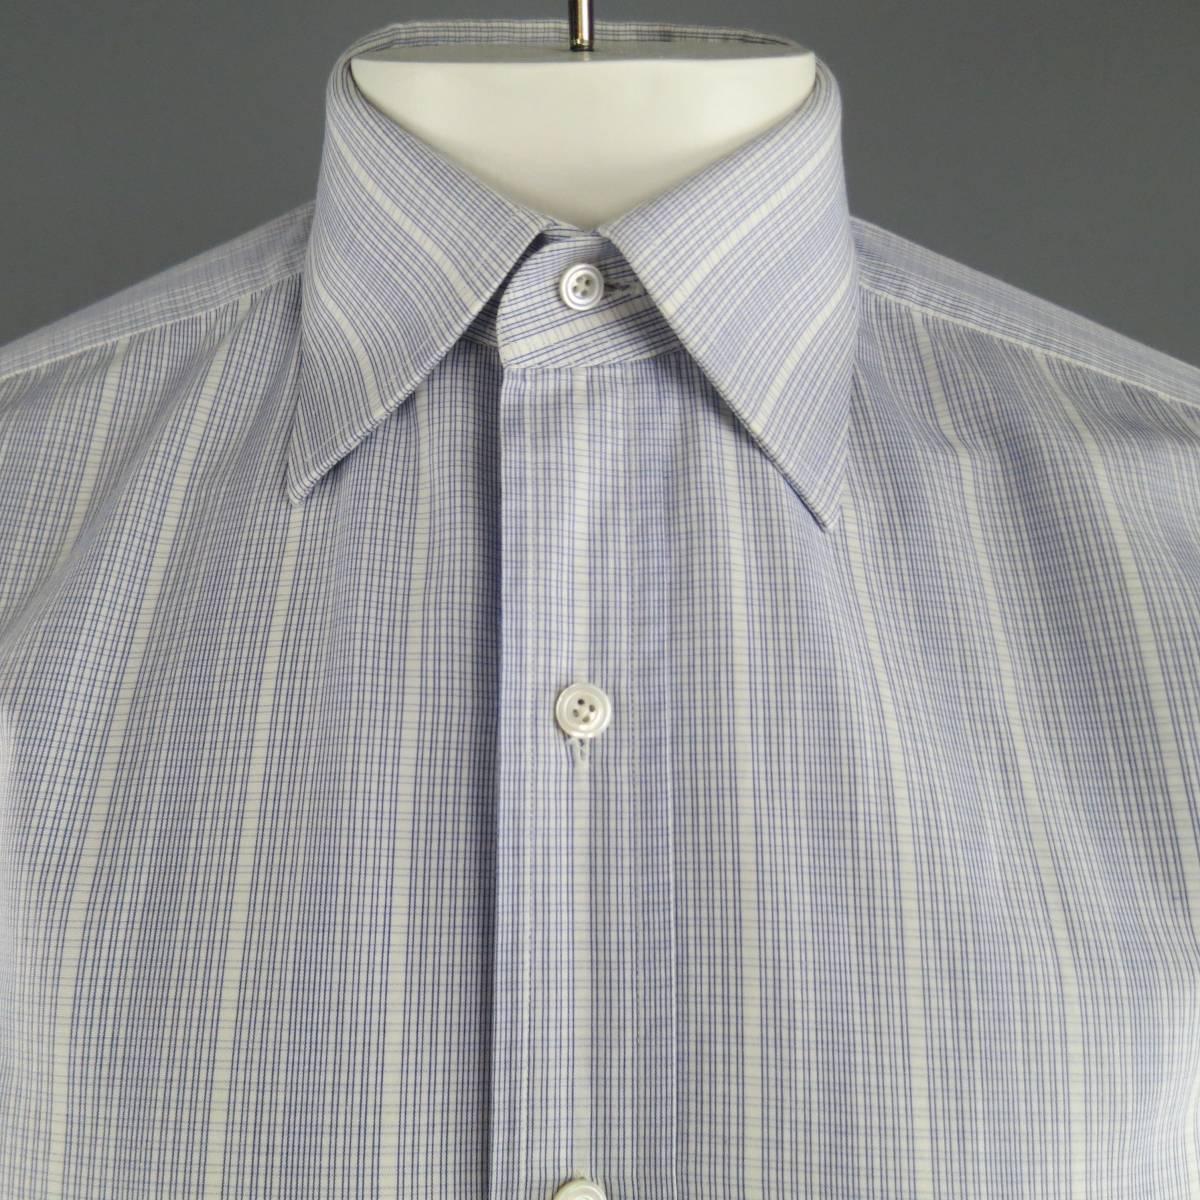 TOM FORD pointed collar dress shirt in a white cotton with all over blue abstract linier windowpane print. Made in Switzerland.
 
Excellent Pre-Owned Condition.
Marked: 39/15.5
 
Measurements:
 
Shoulder: 18 in.
Chest: 42 in.
Sleeve: 27 in.
Length: